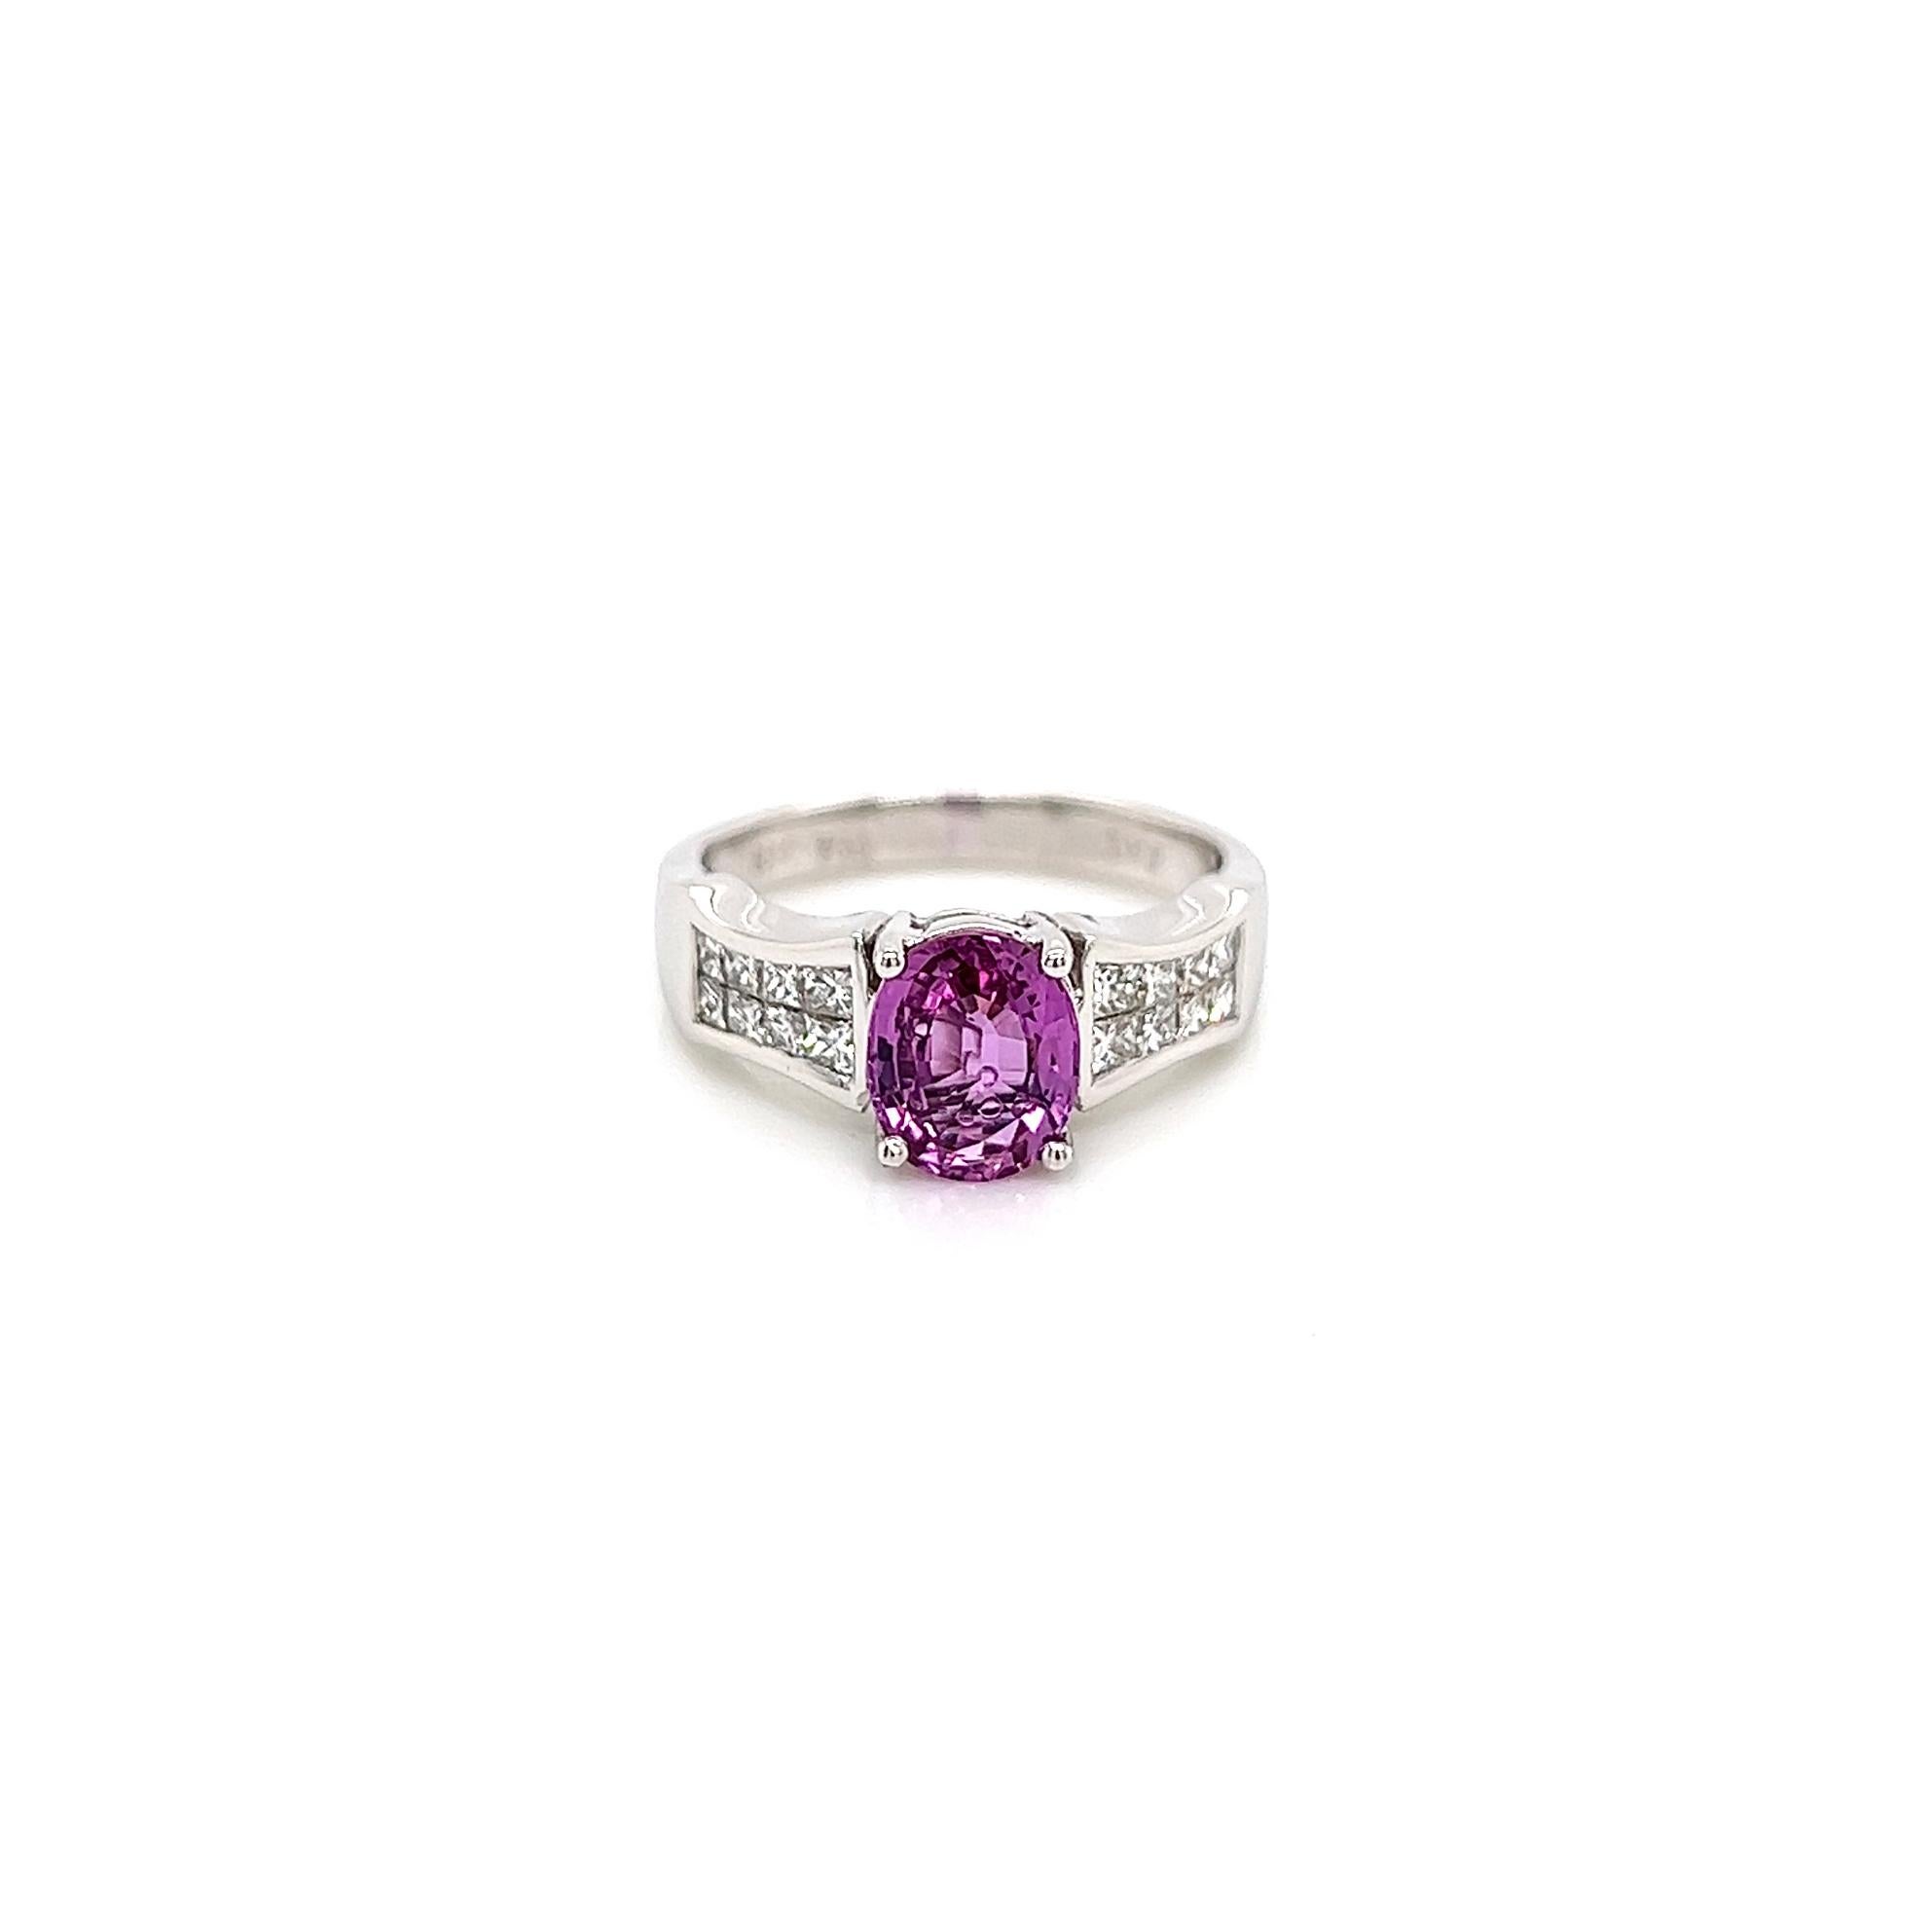 2.33 Total Carat Pink Sapphire Diamond Ladies Ring

-Metal Type: 18K White Gold 
-1.73 Carat Oval Cut Pink Sapphire 
-0.60 Carat Princess Cut Invisible Set Side Natural Diamonds, G-H Color, VS Clarity
-Size 6.75

Made in New York City.